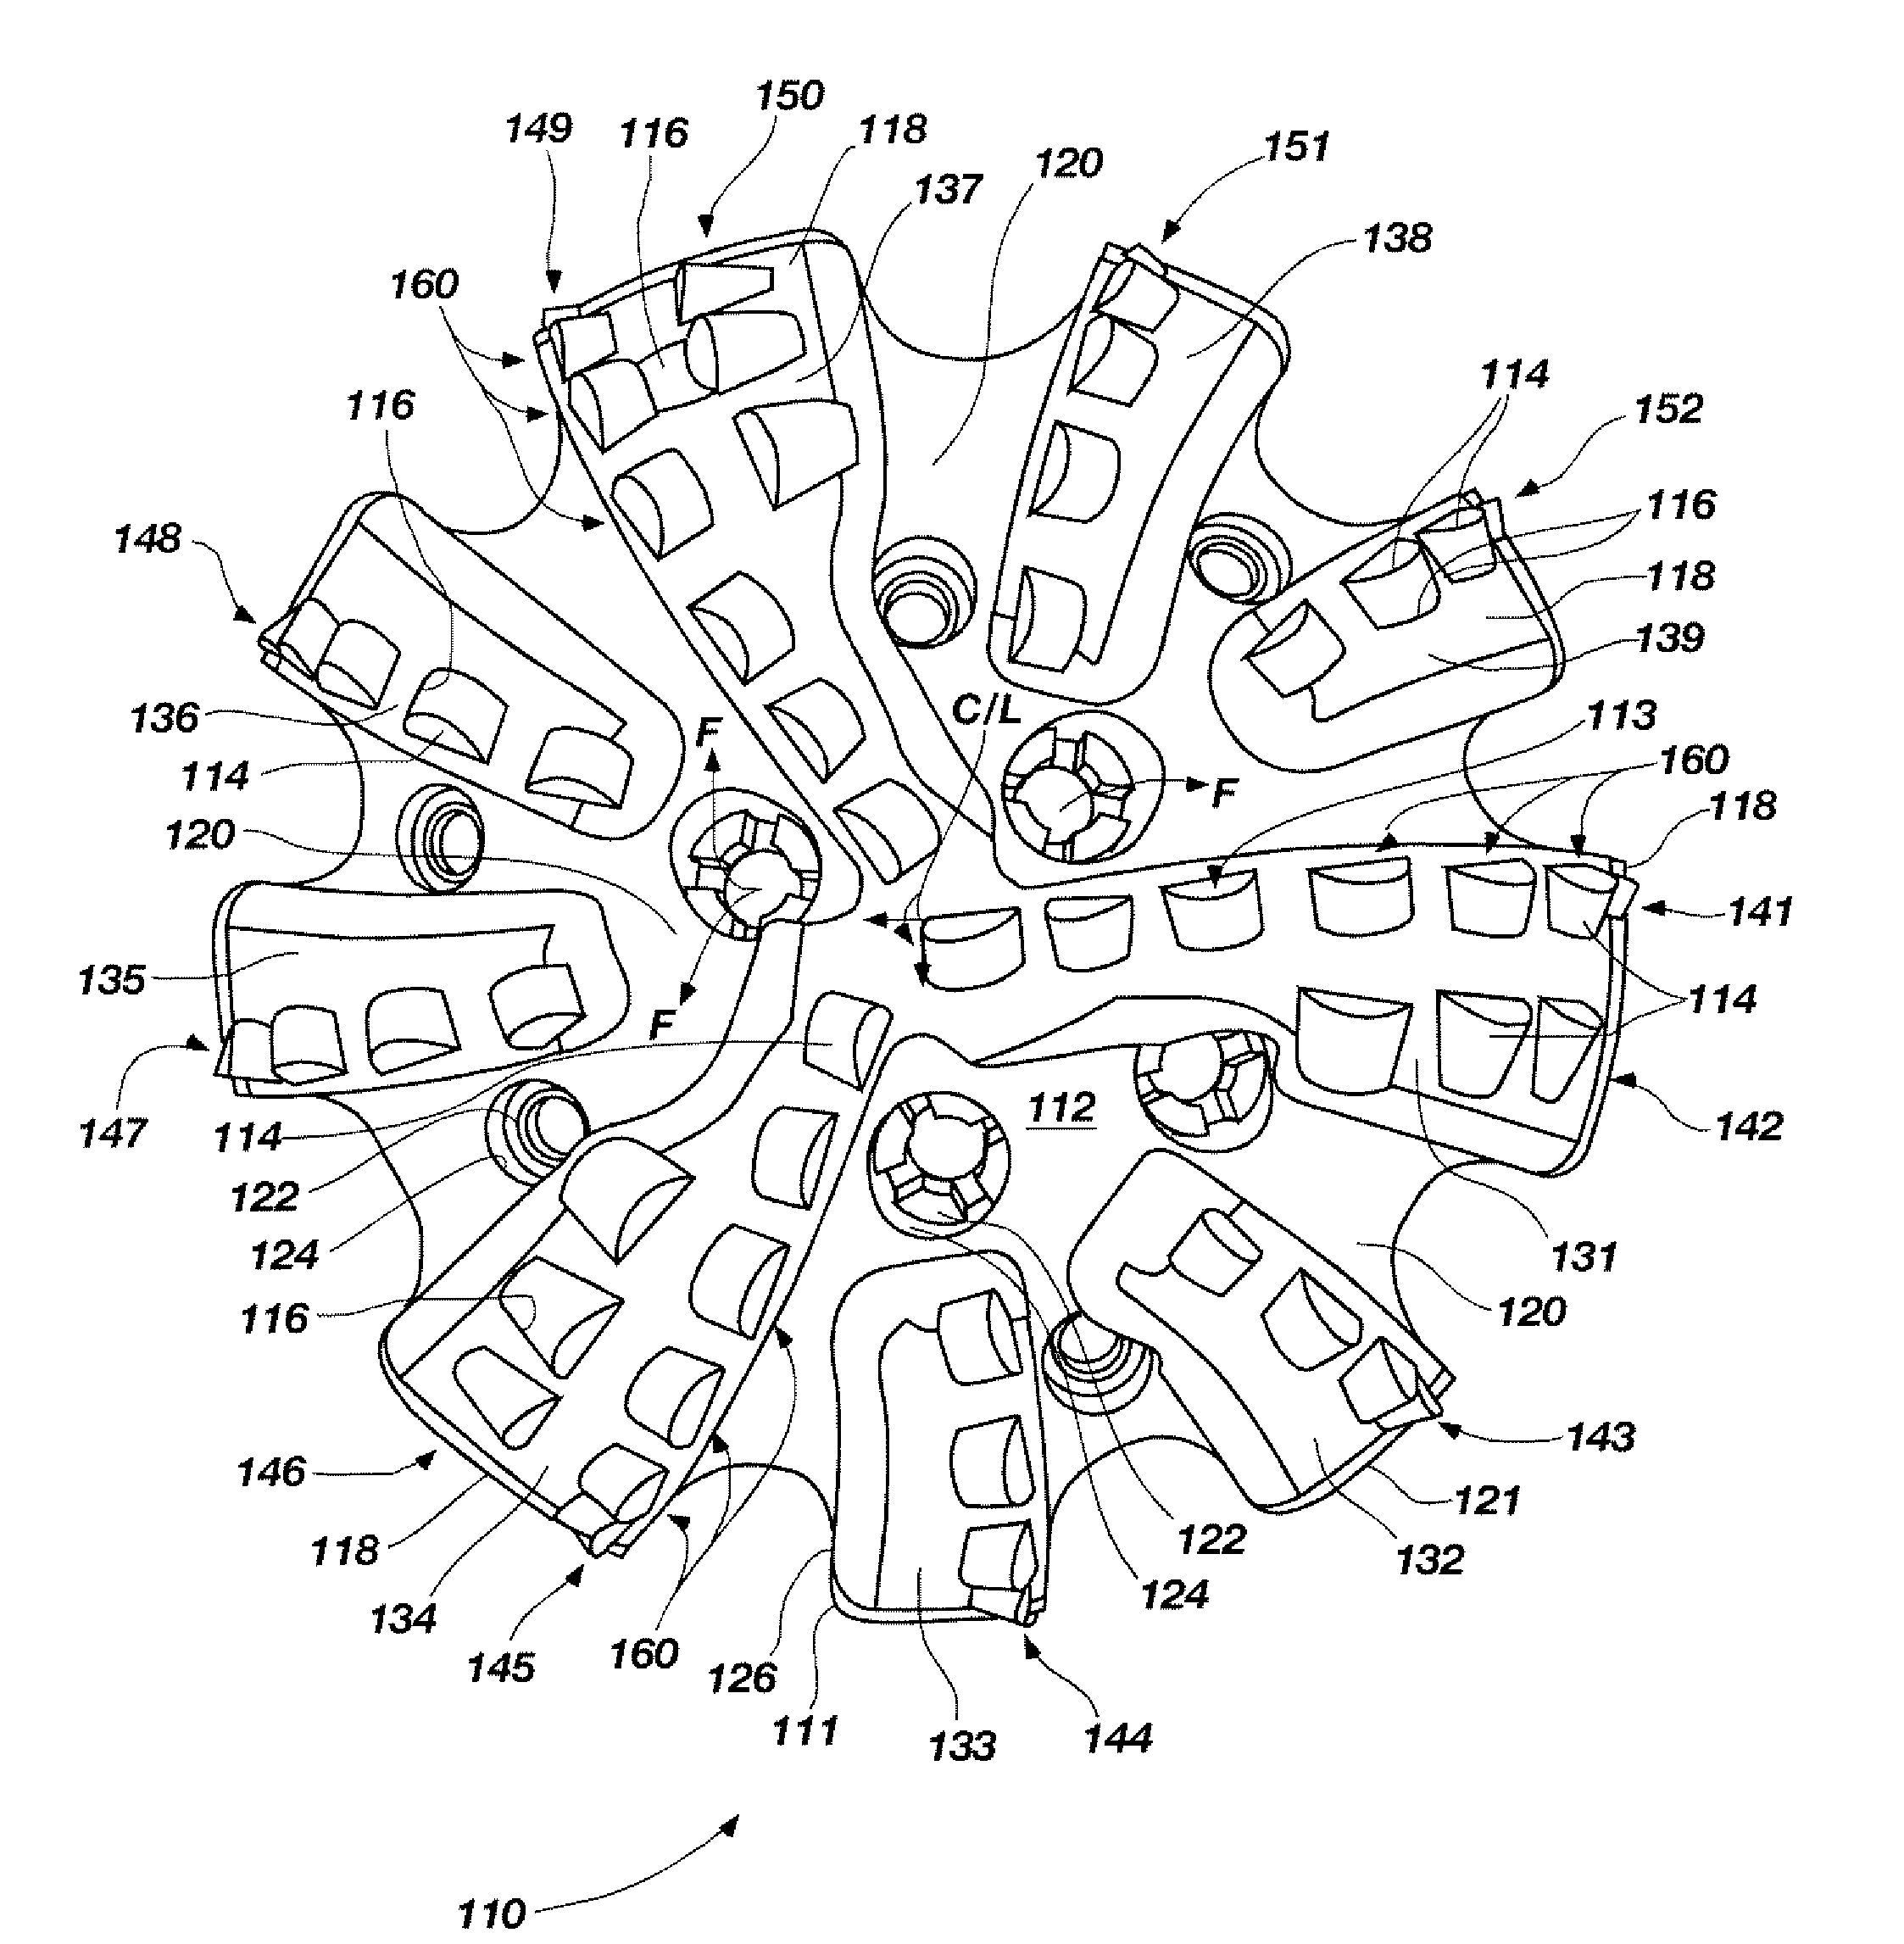 Rotary drag bits having a pilot cutter configuraton and method to pre-fracture subterranean formations therewith